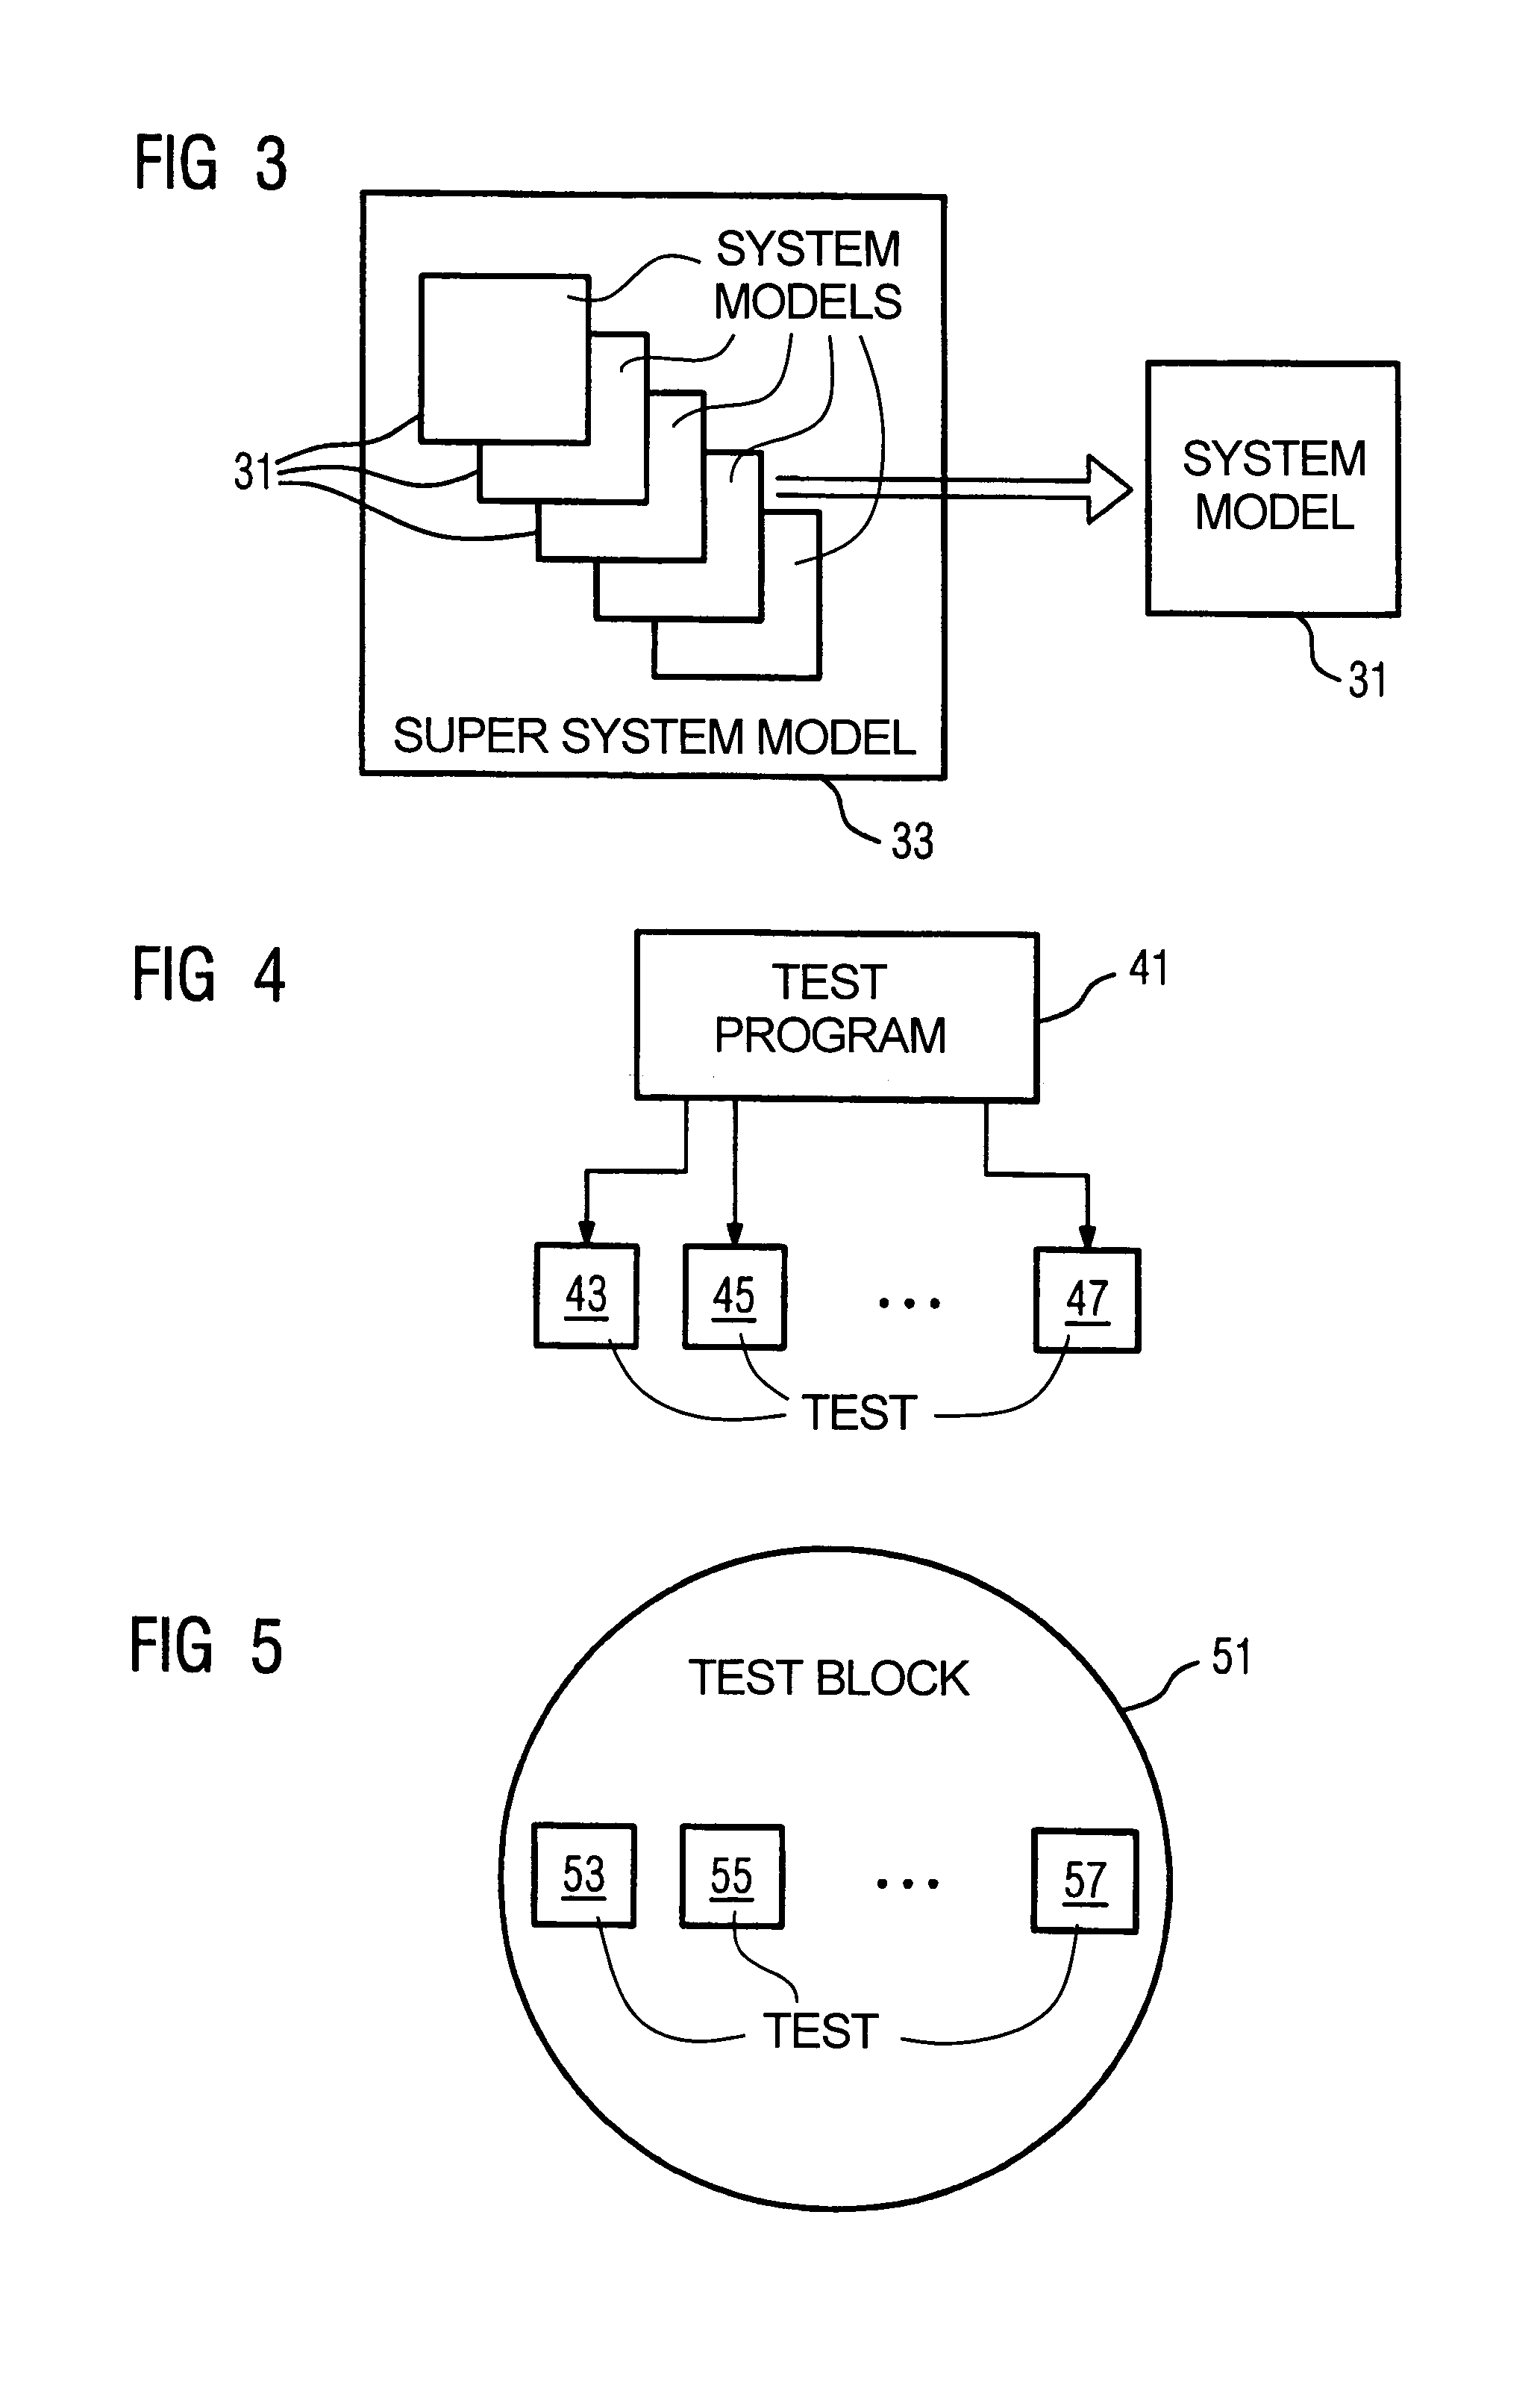 Method to assist identification of a defective functional unit in a technical system